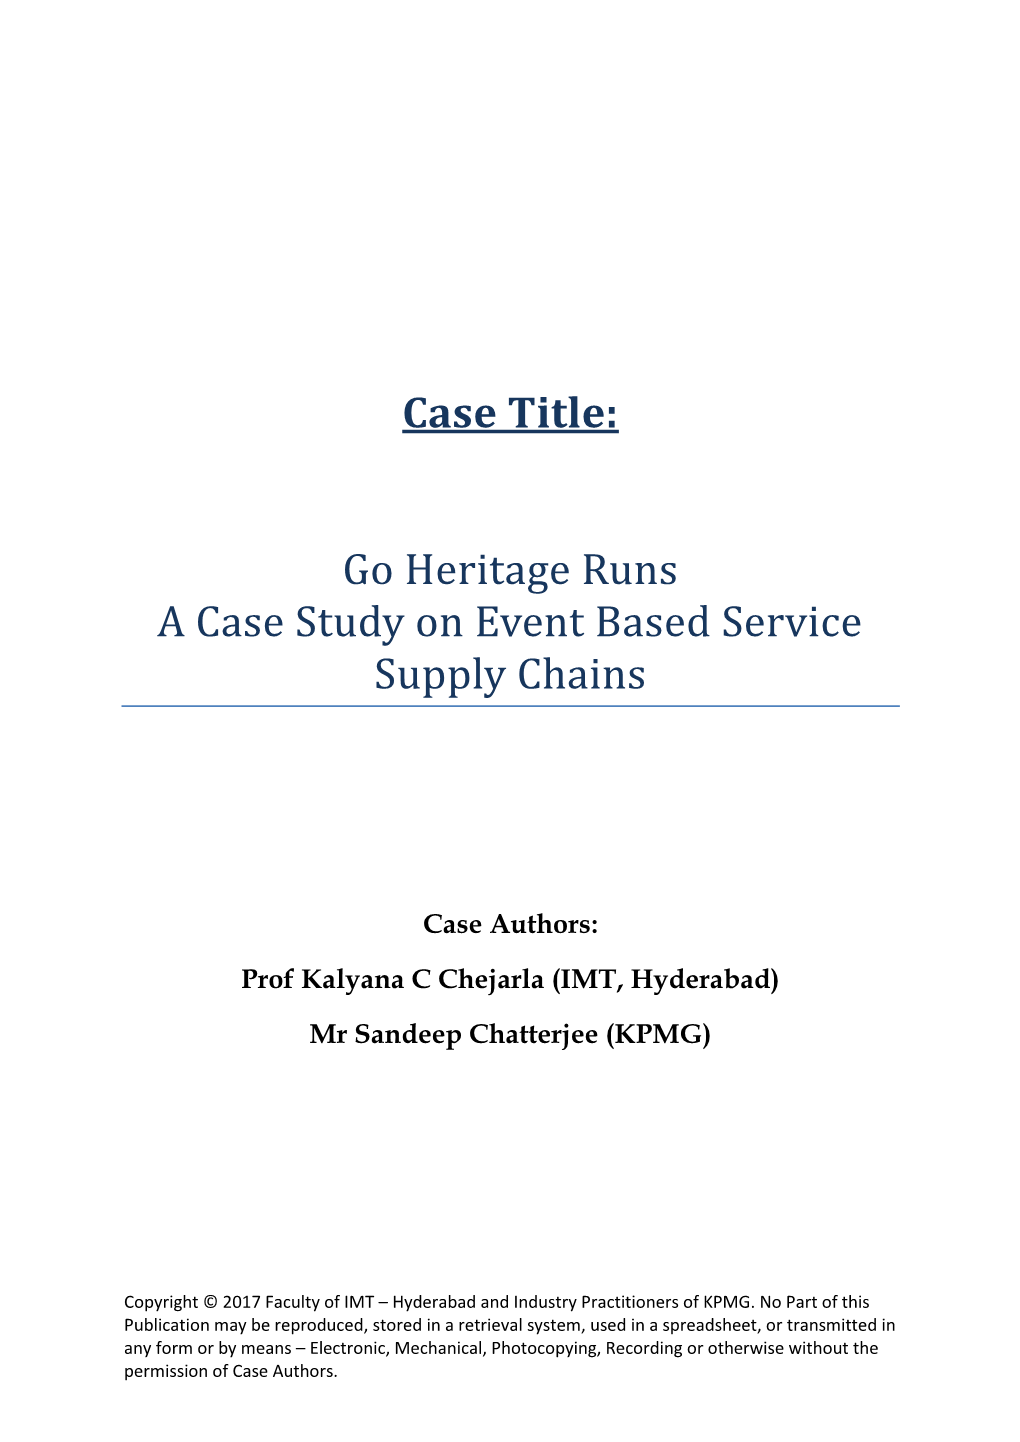 Go Heritage Runs a Case Study on Event Based Service Supply Chains